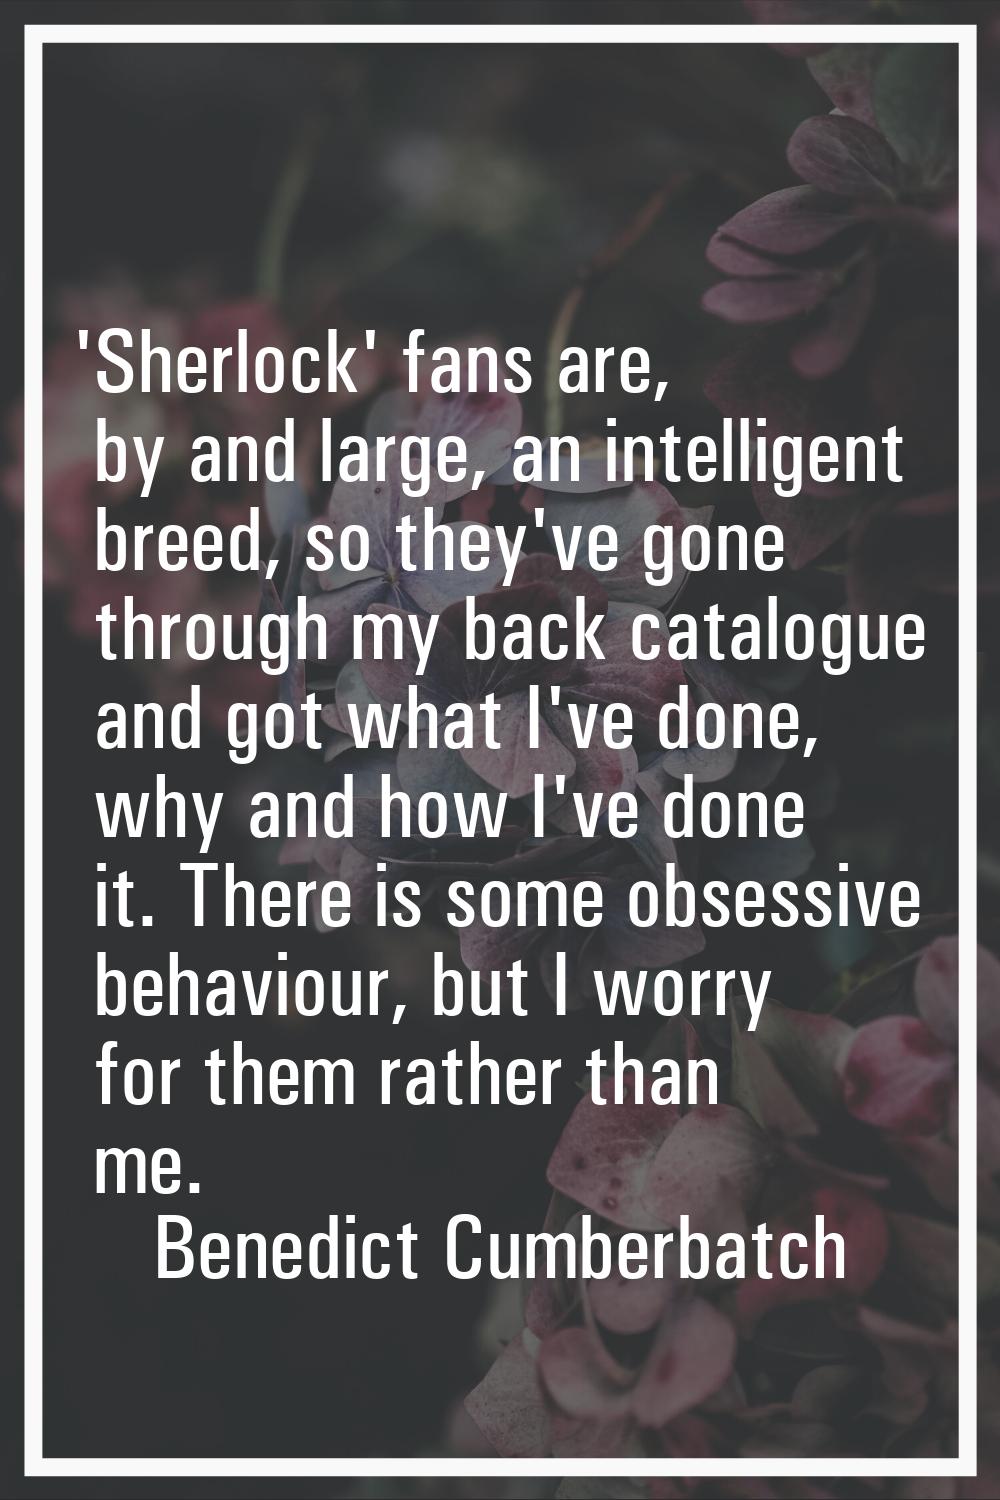 'Sherlock' fans are, by and large, an intelligent breed, so they've gone through my back catalogue 